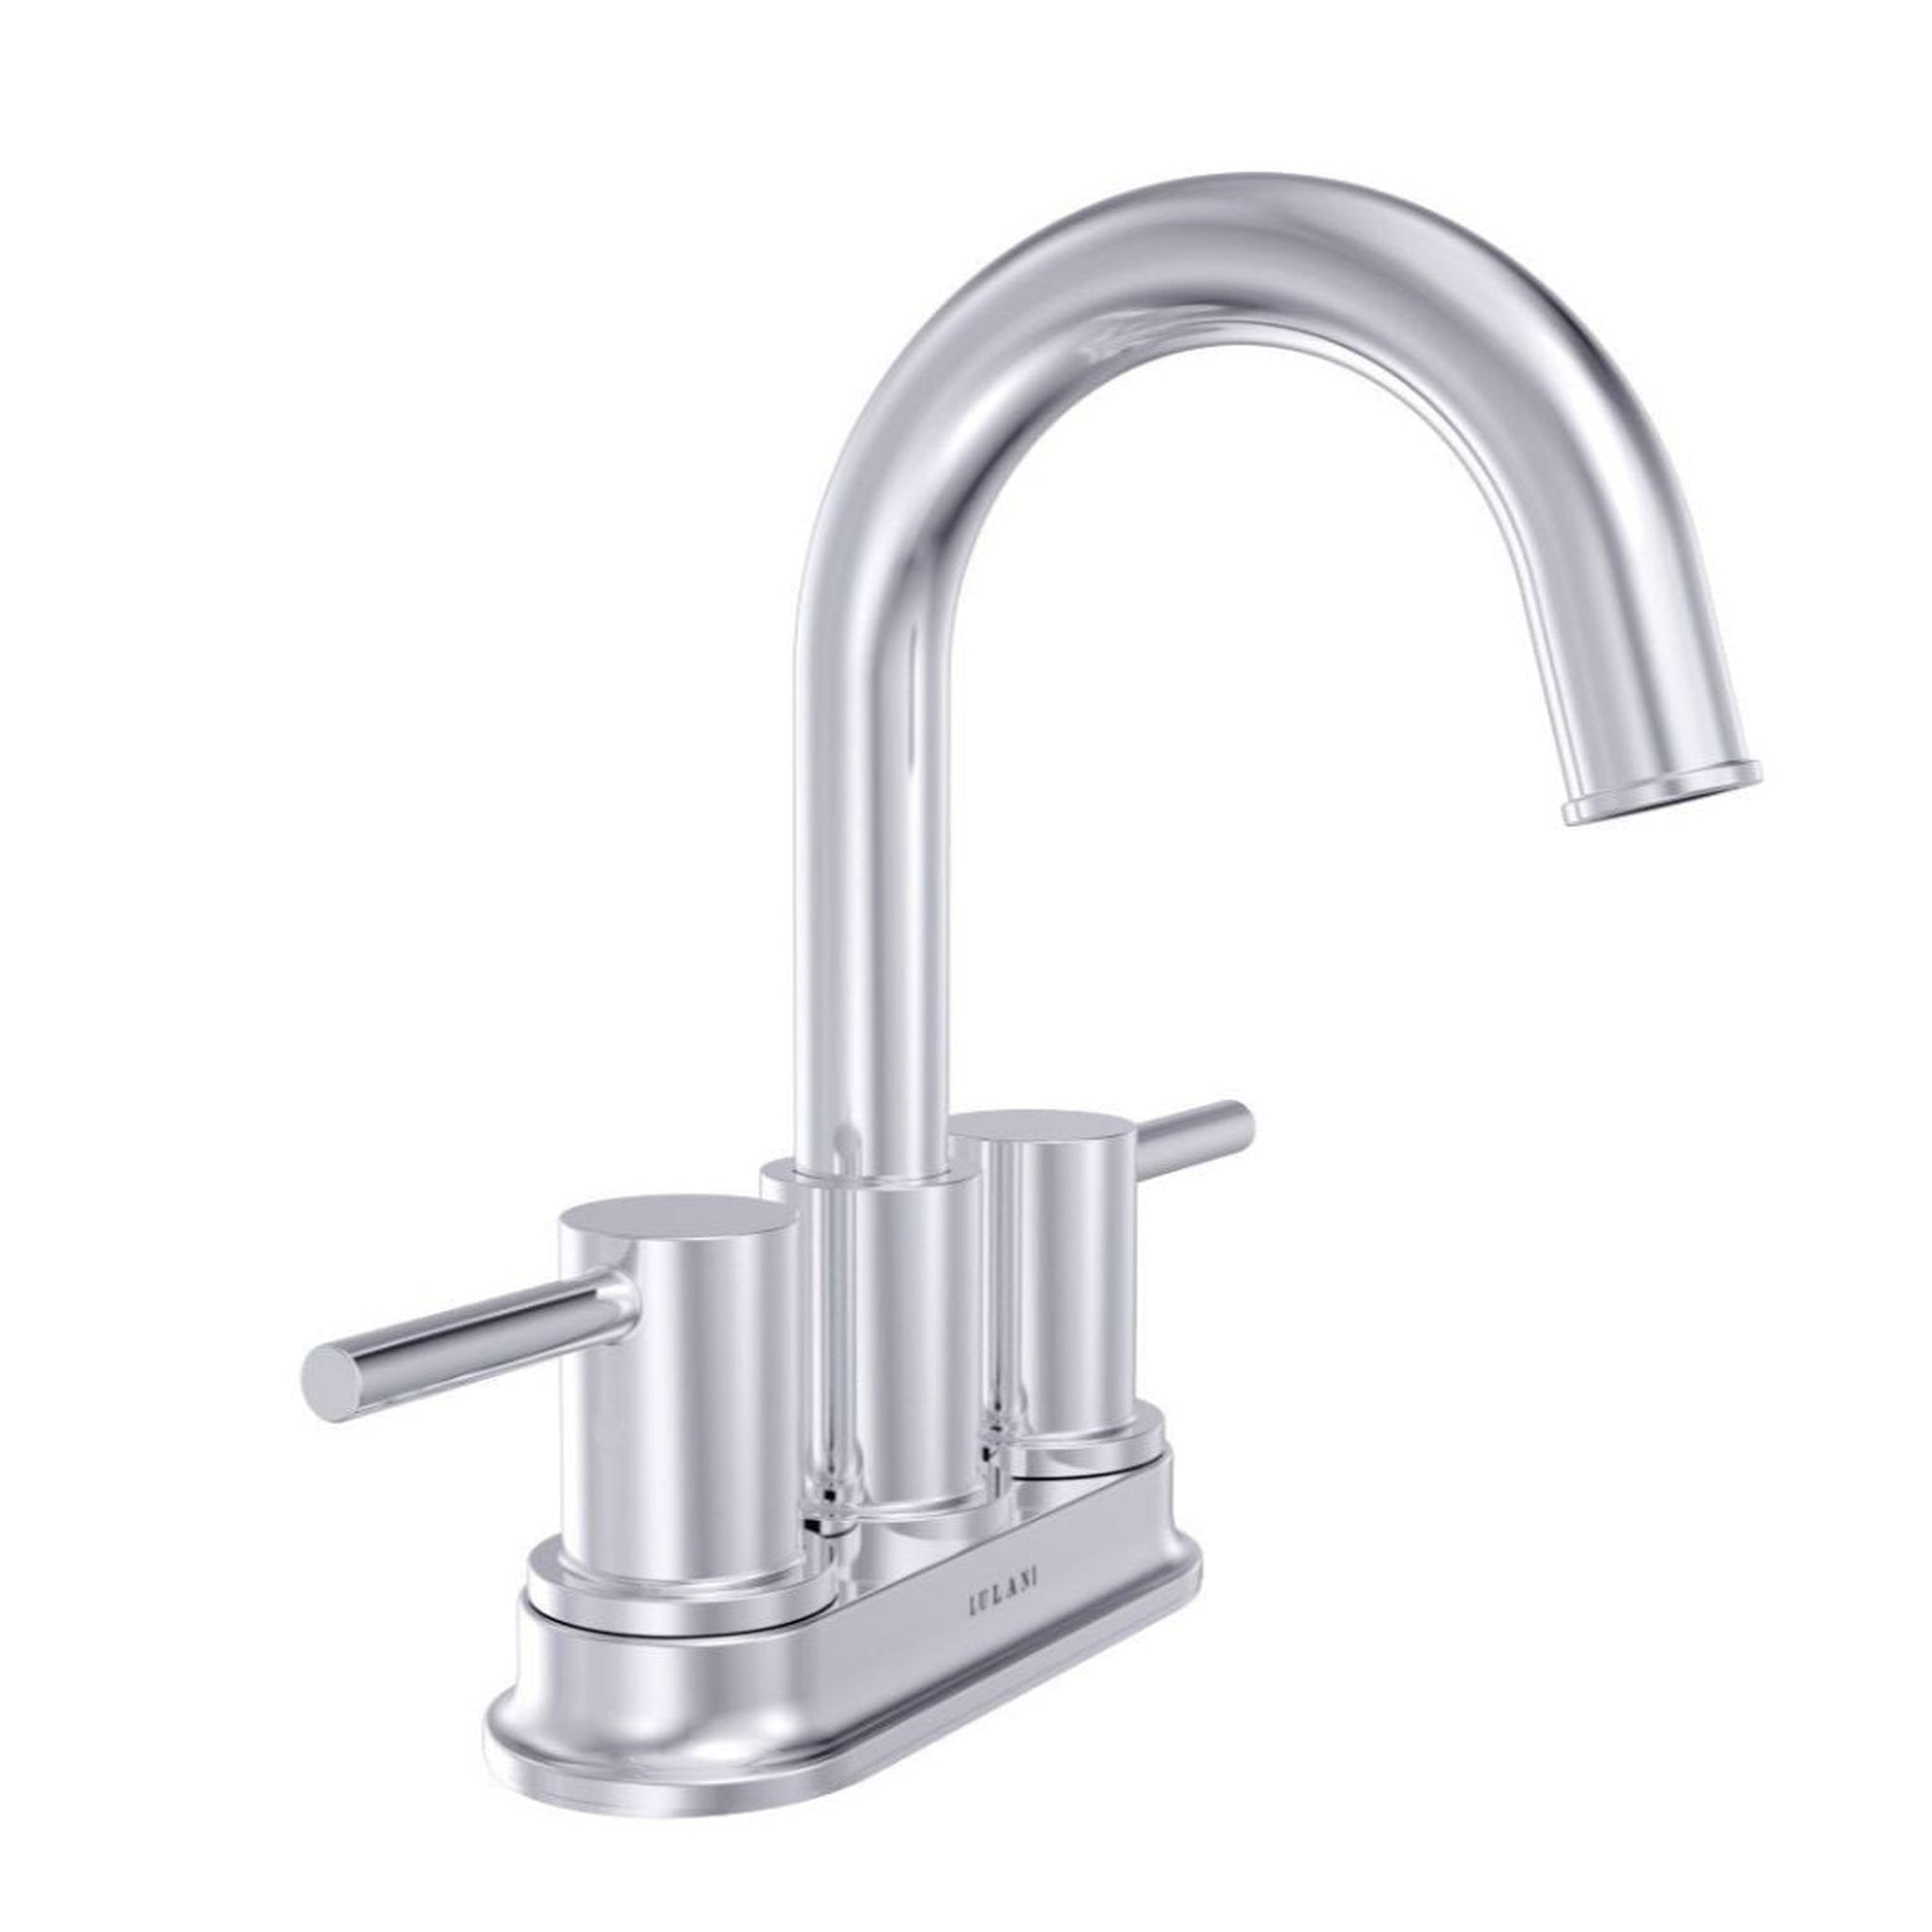 Lulani St. Lucia Chrome 1.2 GPM Two Handle Centerset Faucet With Drain Assembly